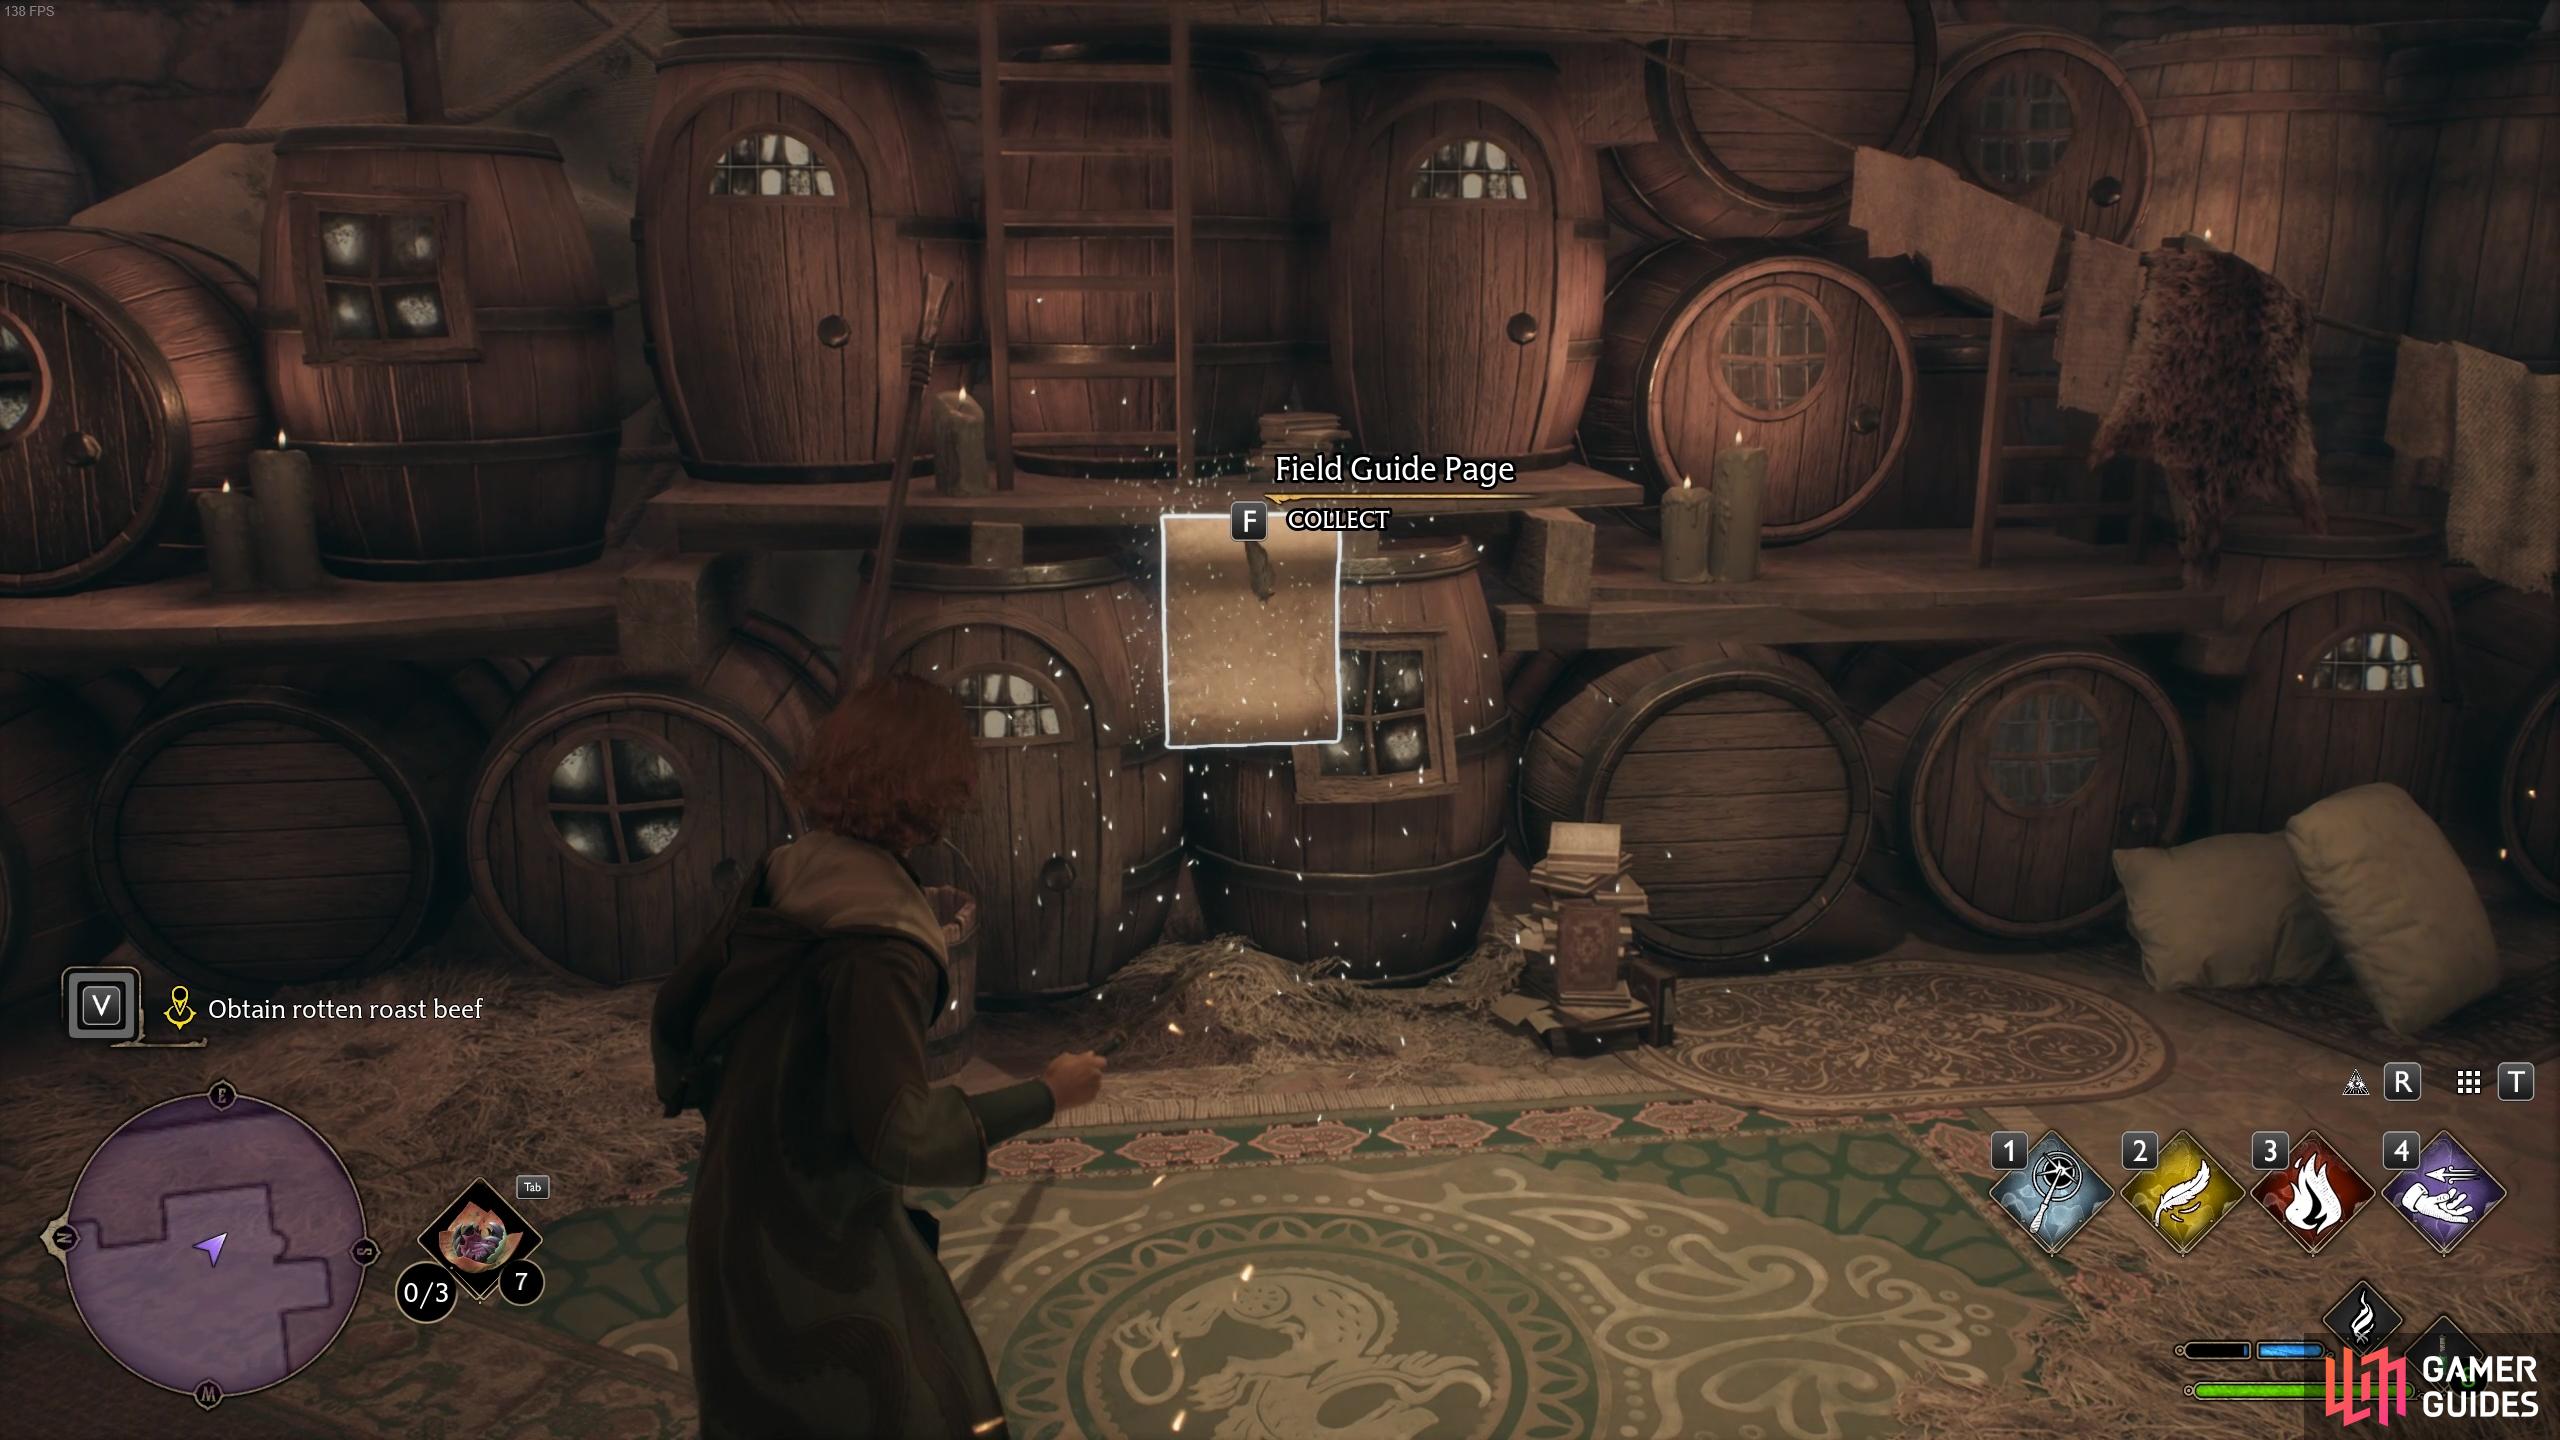 Cast Revelio in front of these magical barrels to reveal the page.